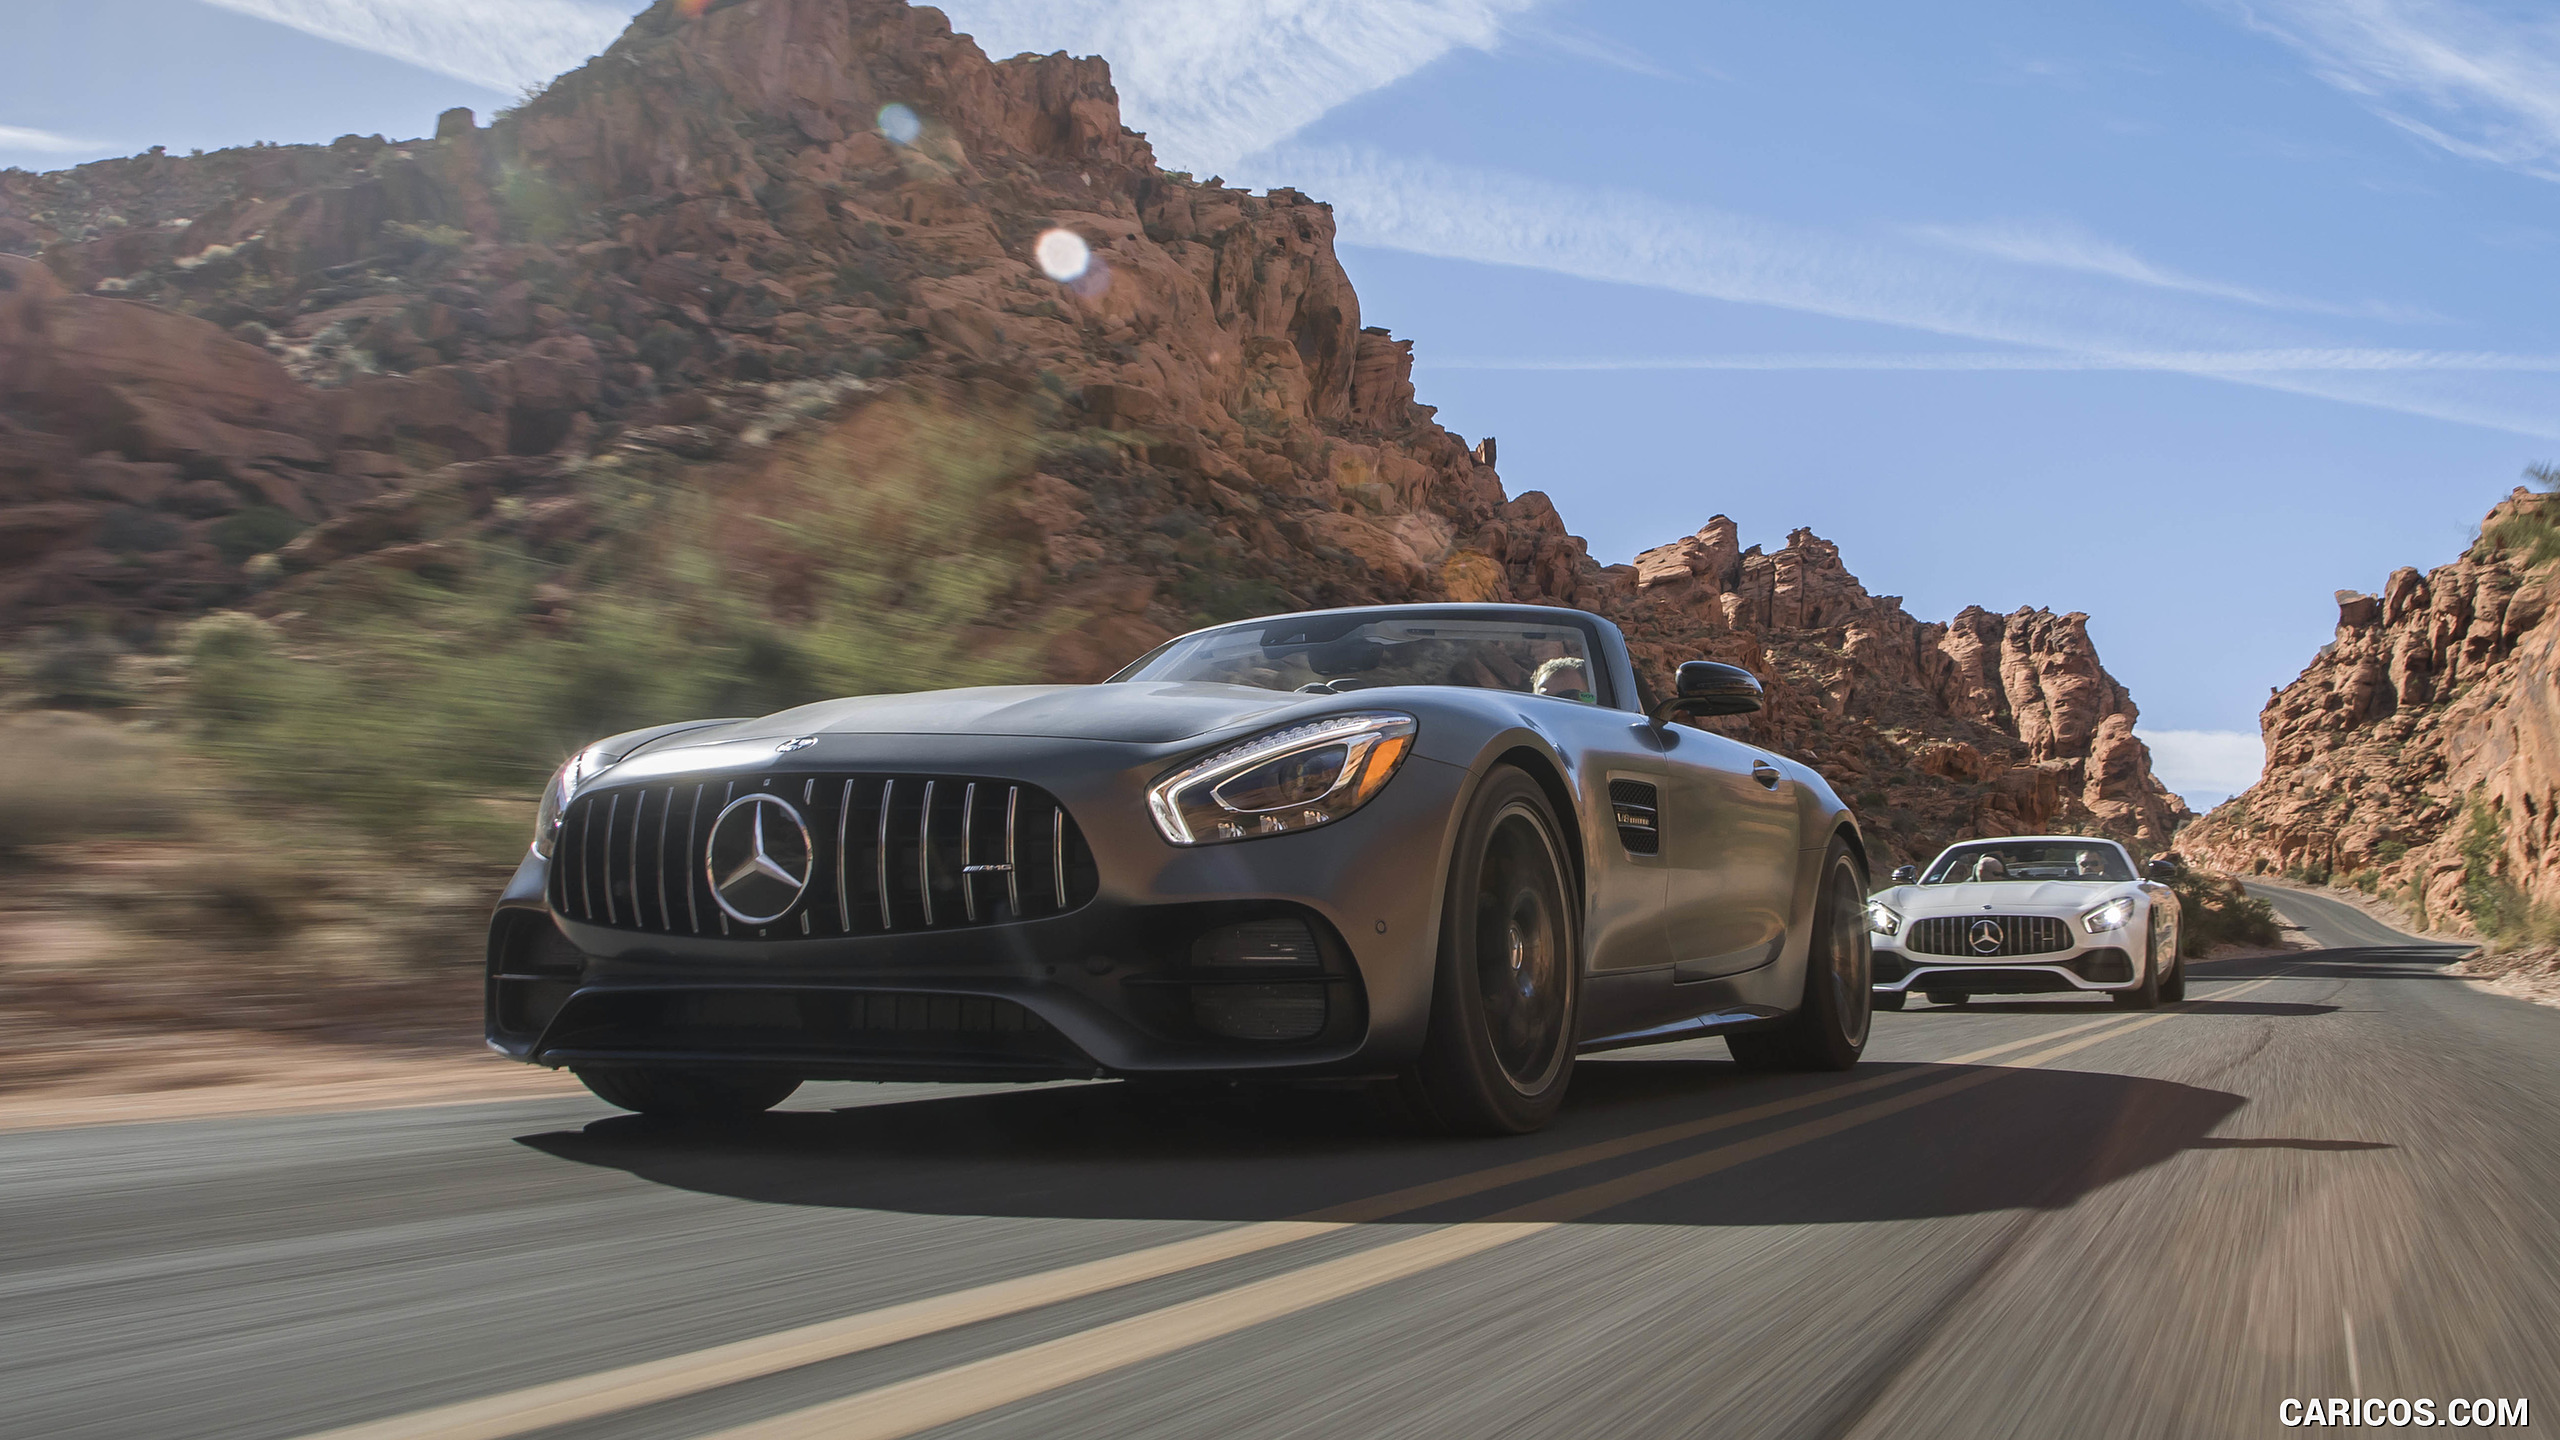 2018 Mercedes-AMG GT and GT C Roadsters - Front Three-Quarter, #50 of 350